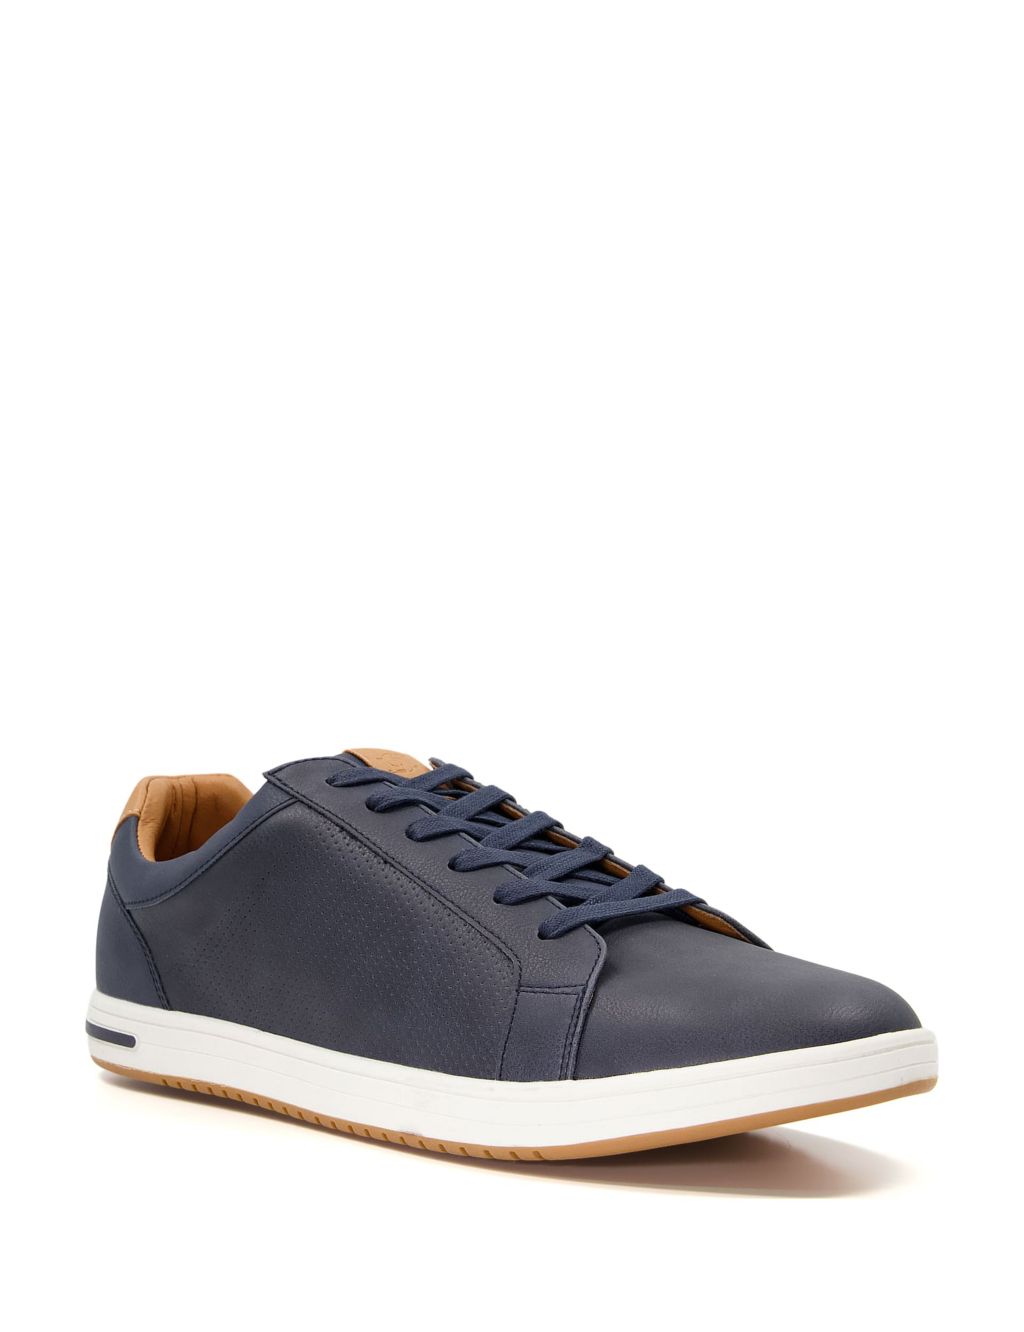 Suedette Lace Up Trainers image 2